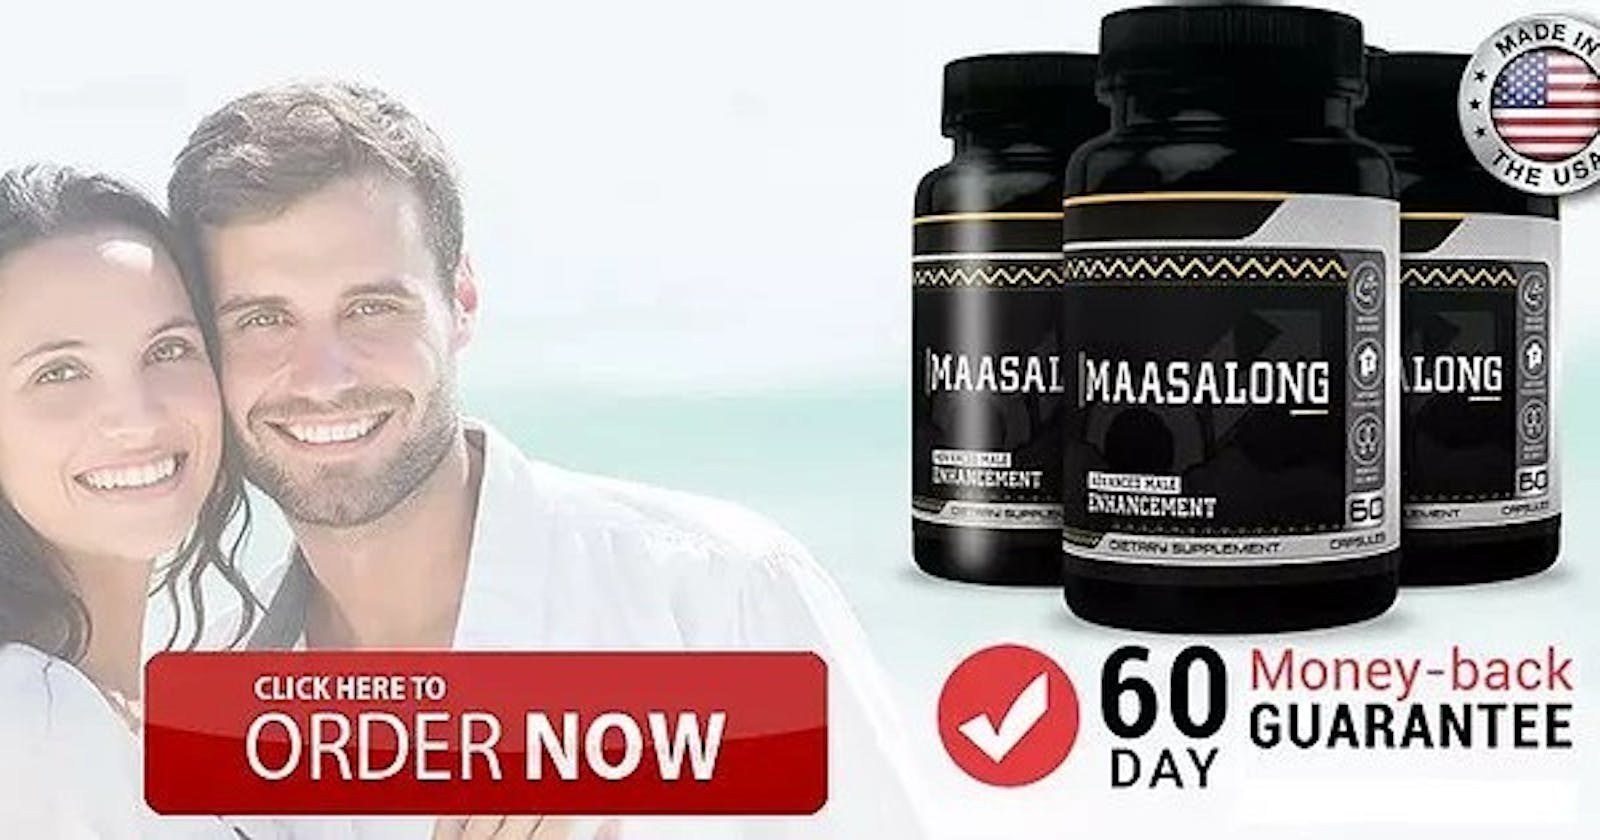 Boost Your Bedroom Confidence: The Benefits of Maasalong Male Enhancement